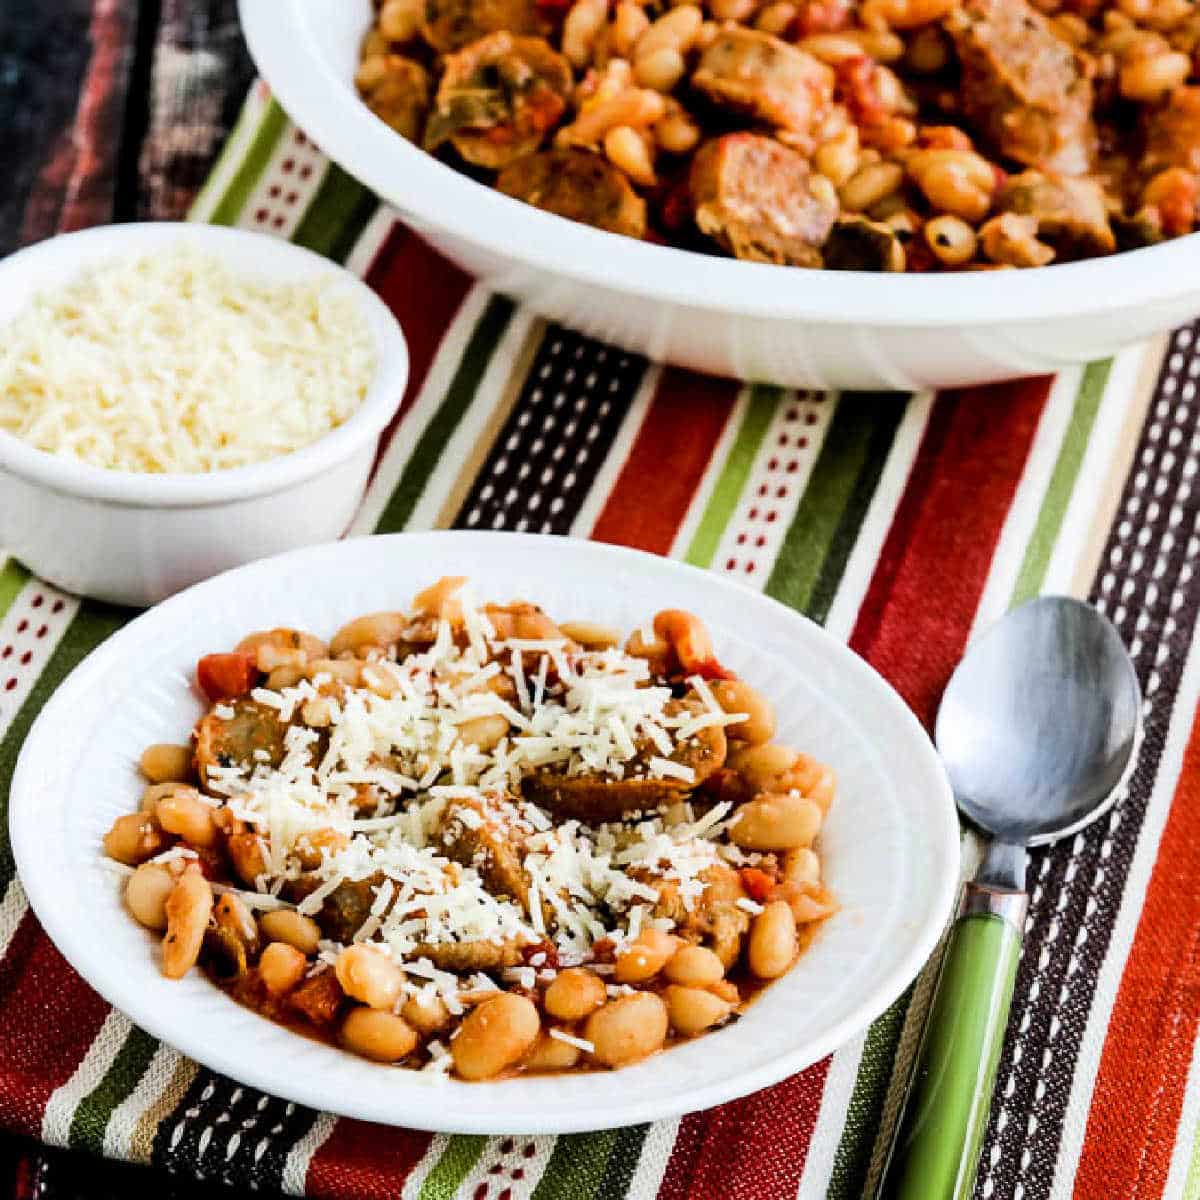 Square image for Italian Sausage and White Beans with Sage showing beans in serving bowl with one serving dish in front.